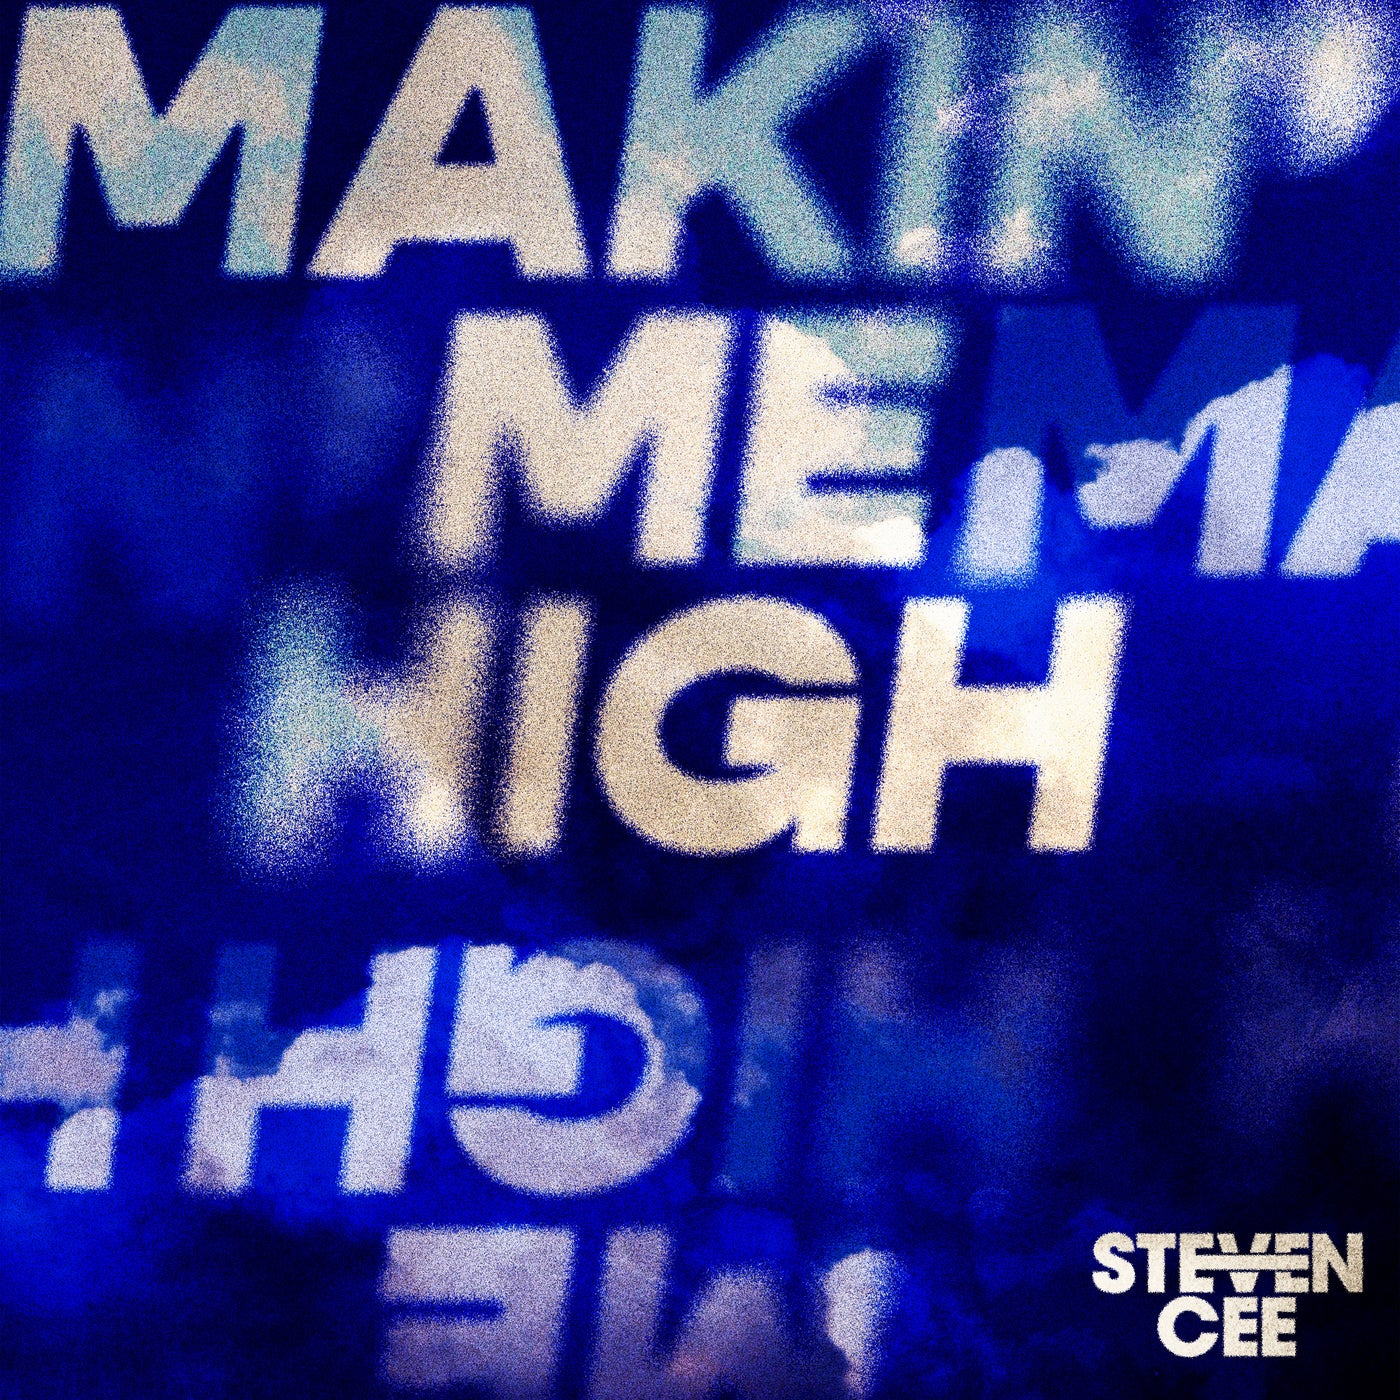 image cover: Steven Cee - Makin' Me High on Audiowhore Records